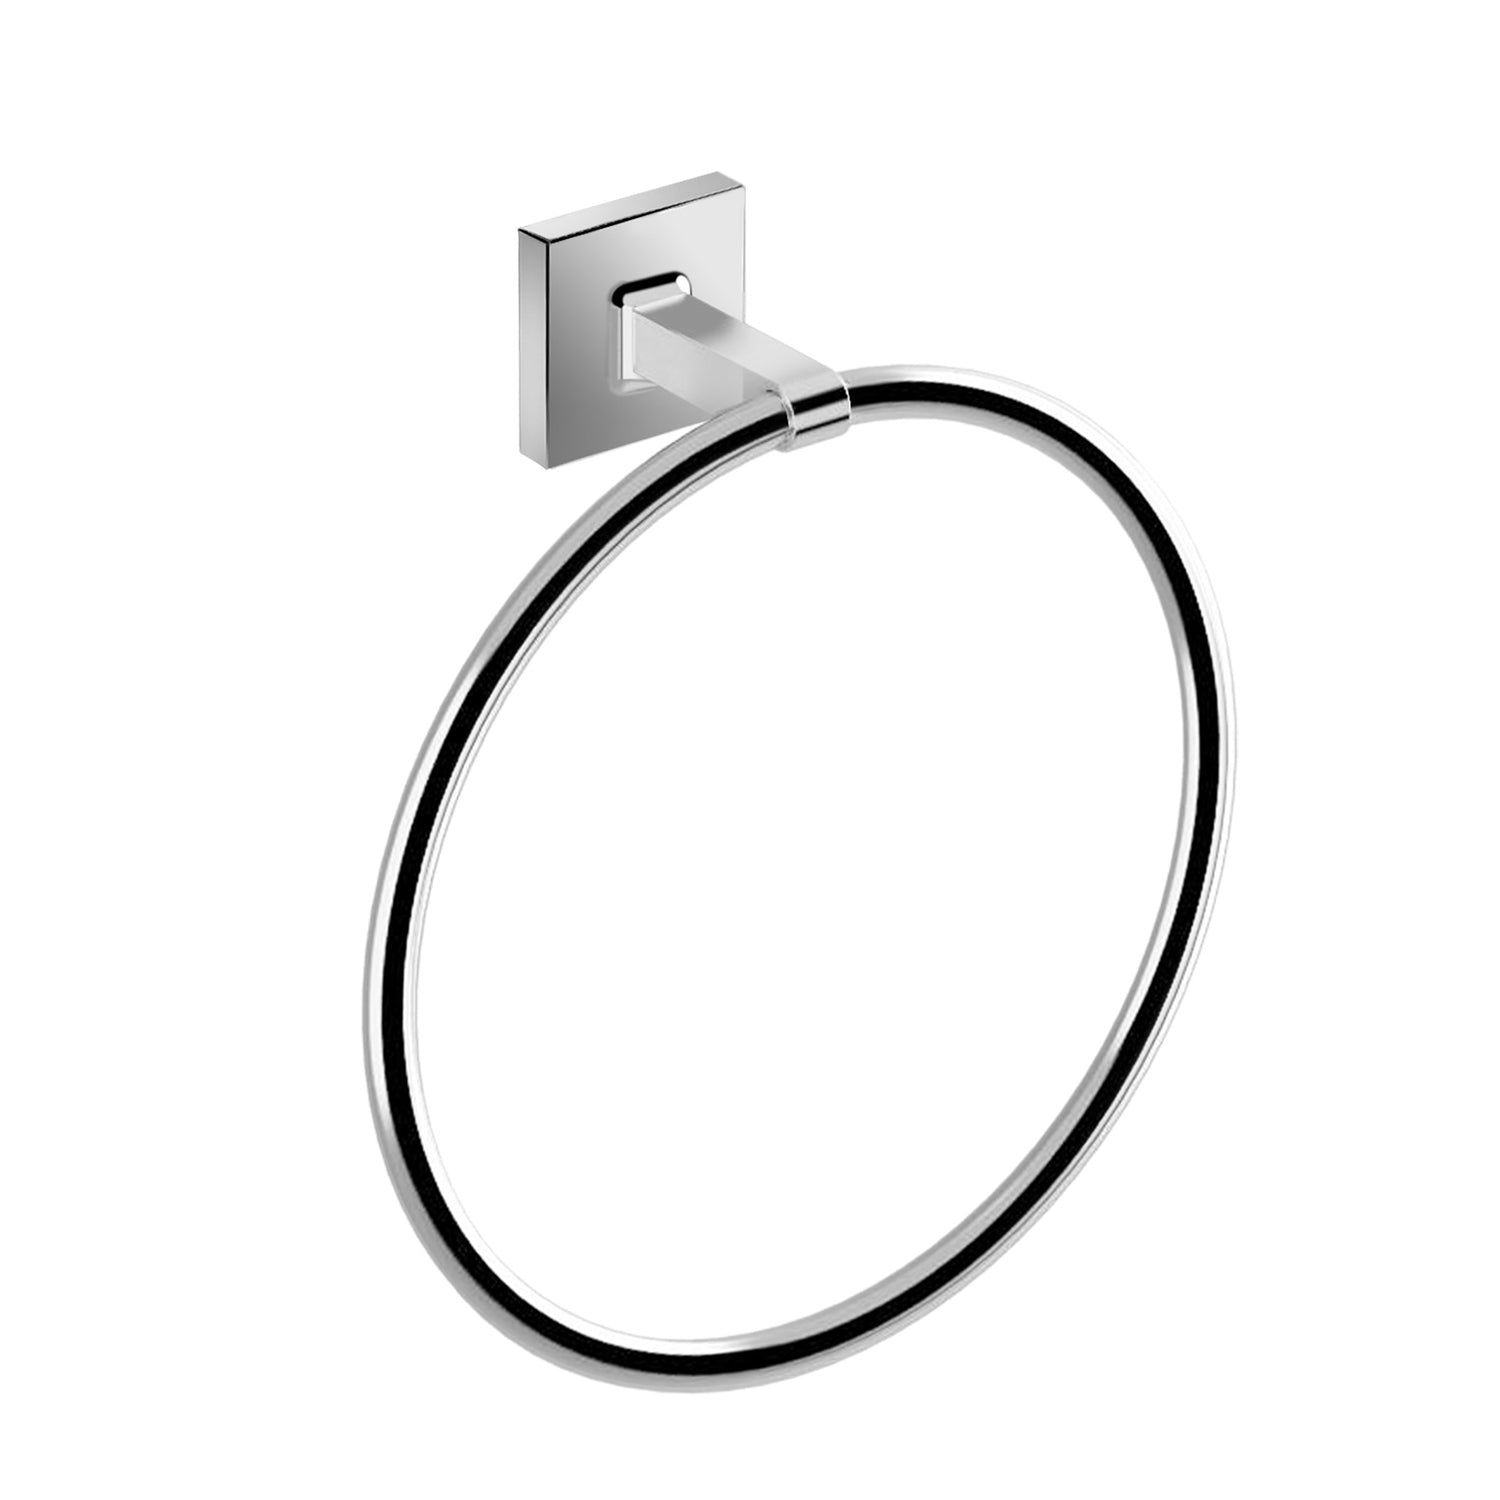 DAX Milano Towel Ring, Wall Mount, Brass Body, Brushed Nickel Finish, 7-7/8 x 2-7/16 x 8-11/16 Inches (DAX-GDC160172-BN)